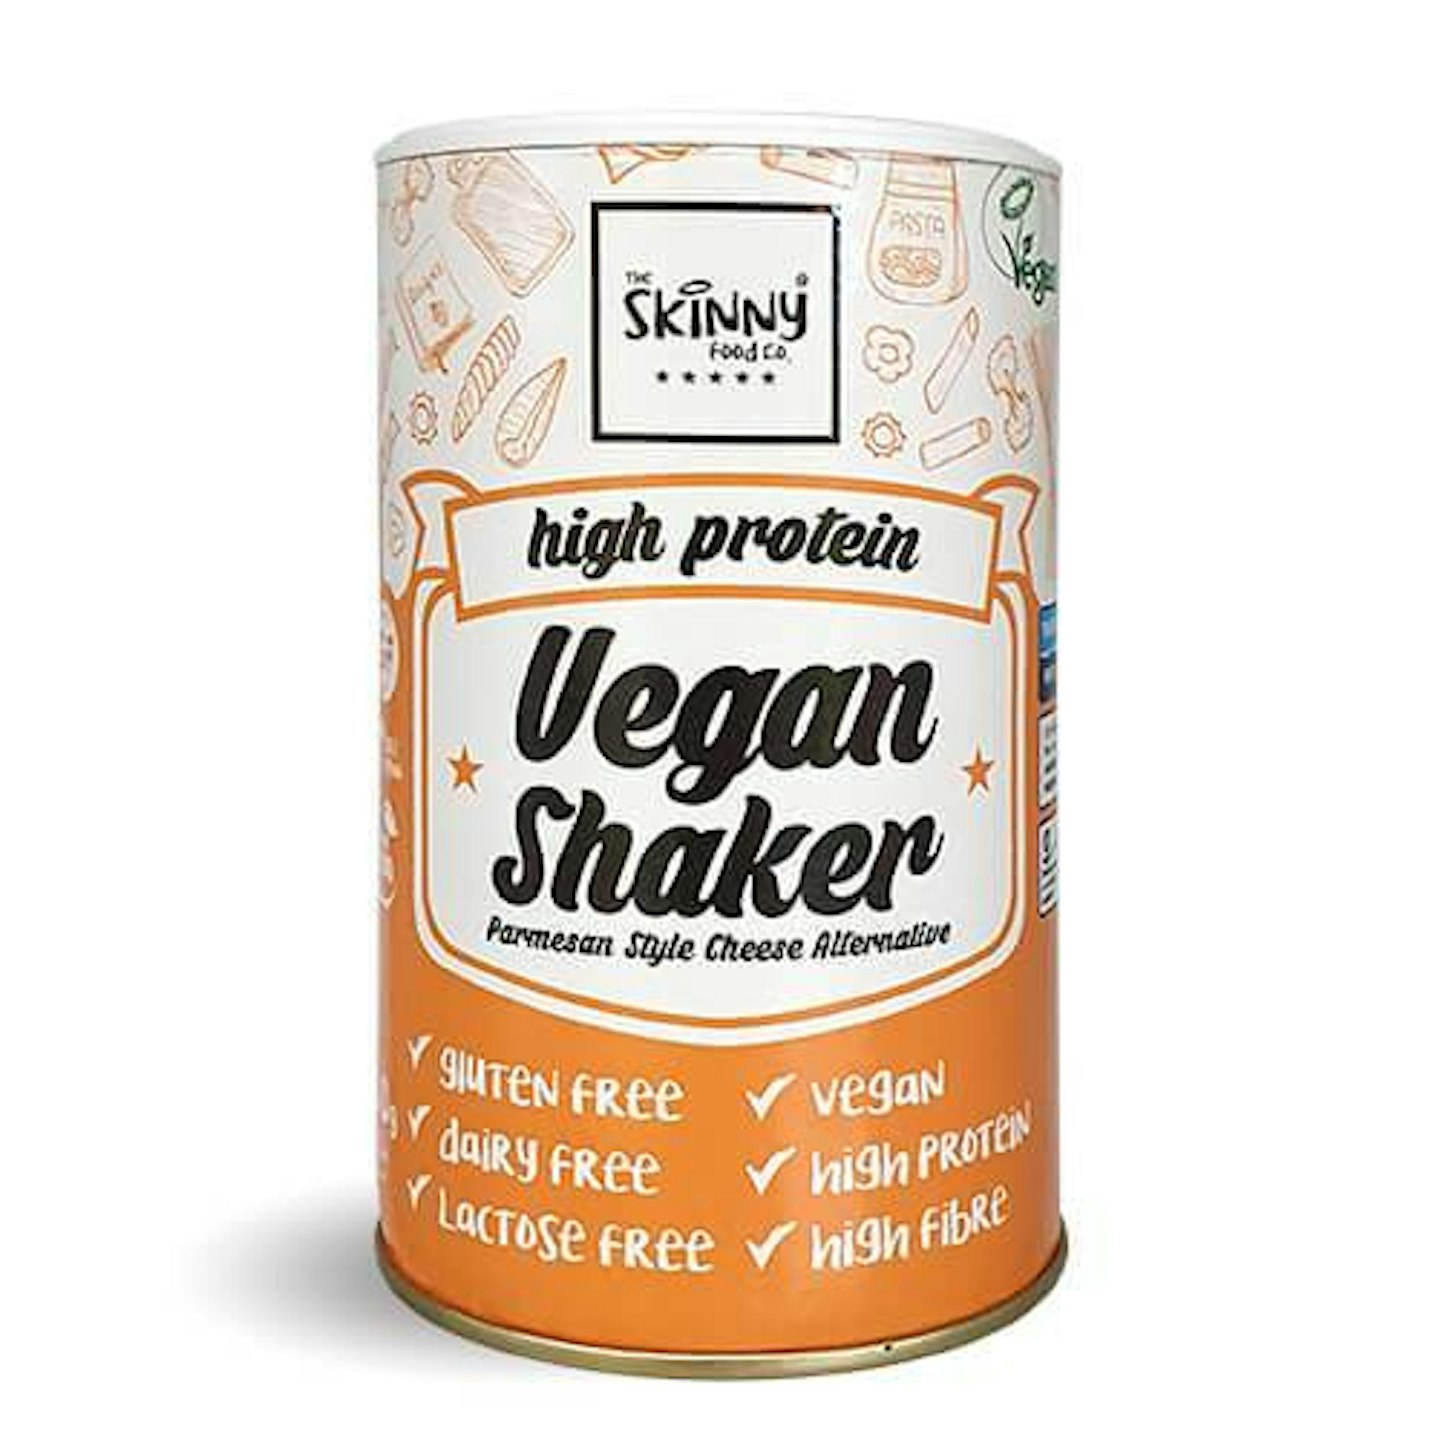 The Skinny Food Co High Protein Vegan Cheese Shaker